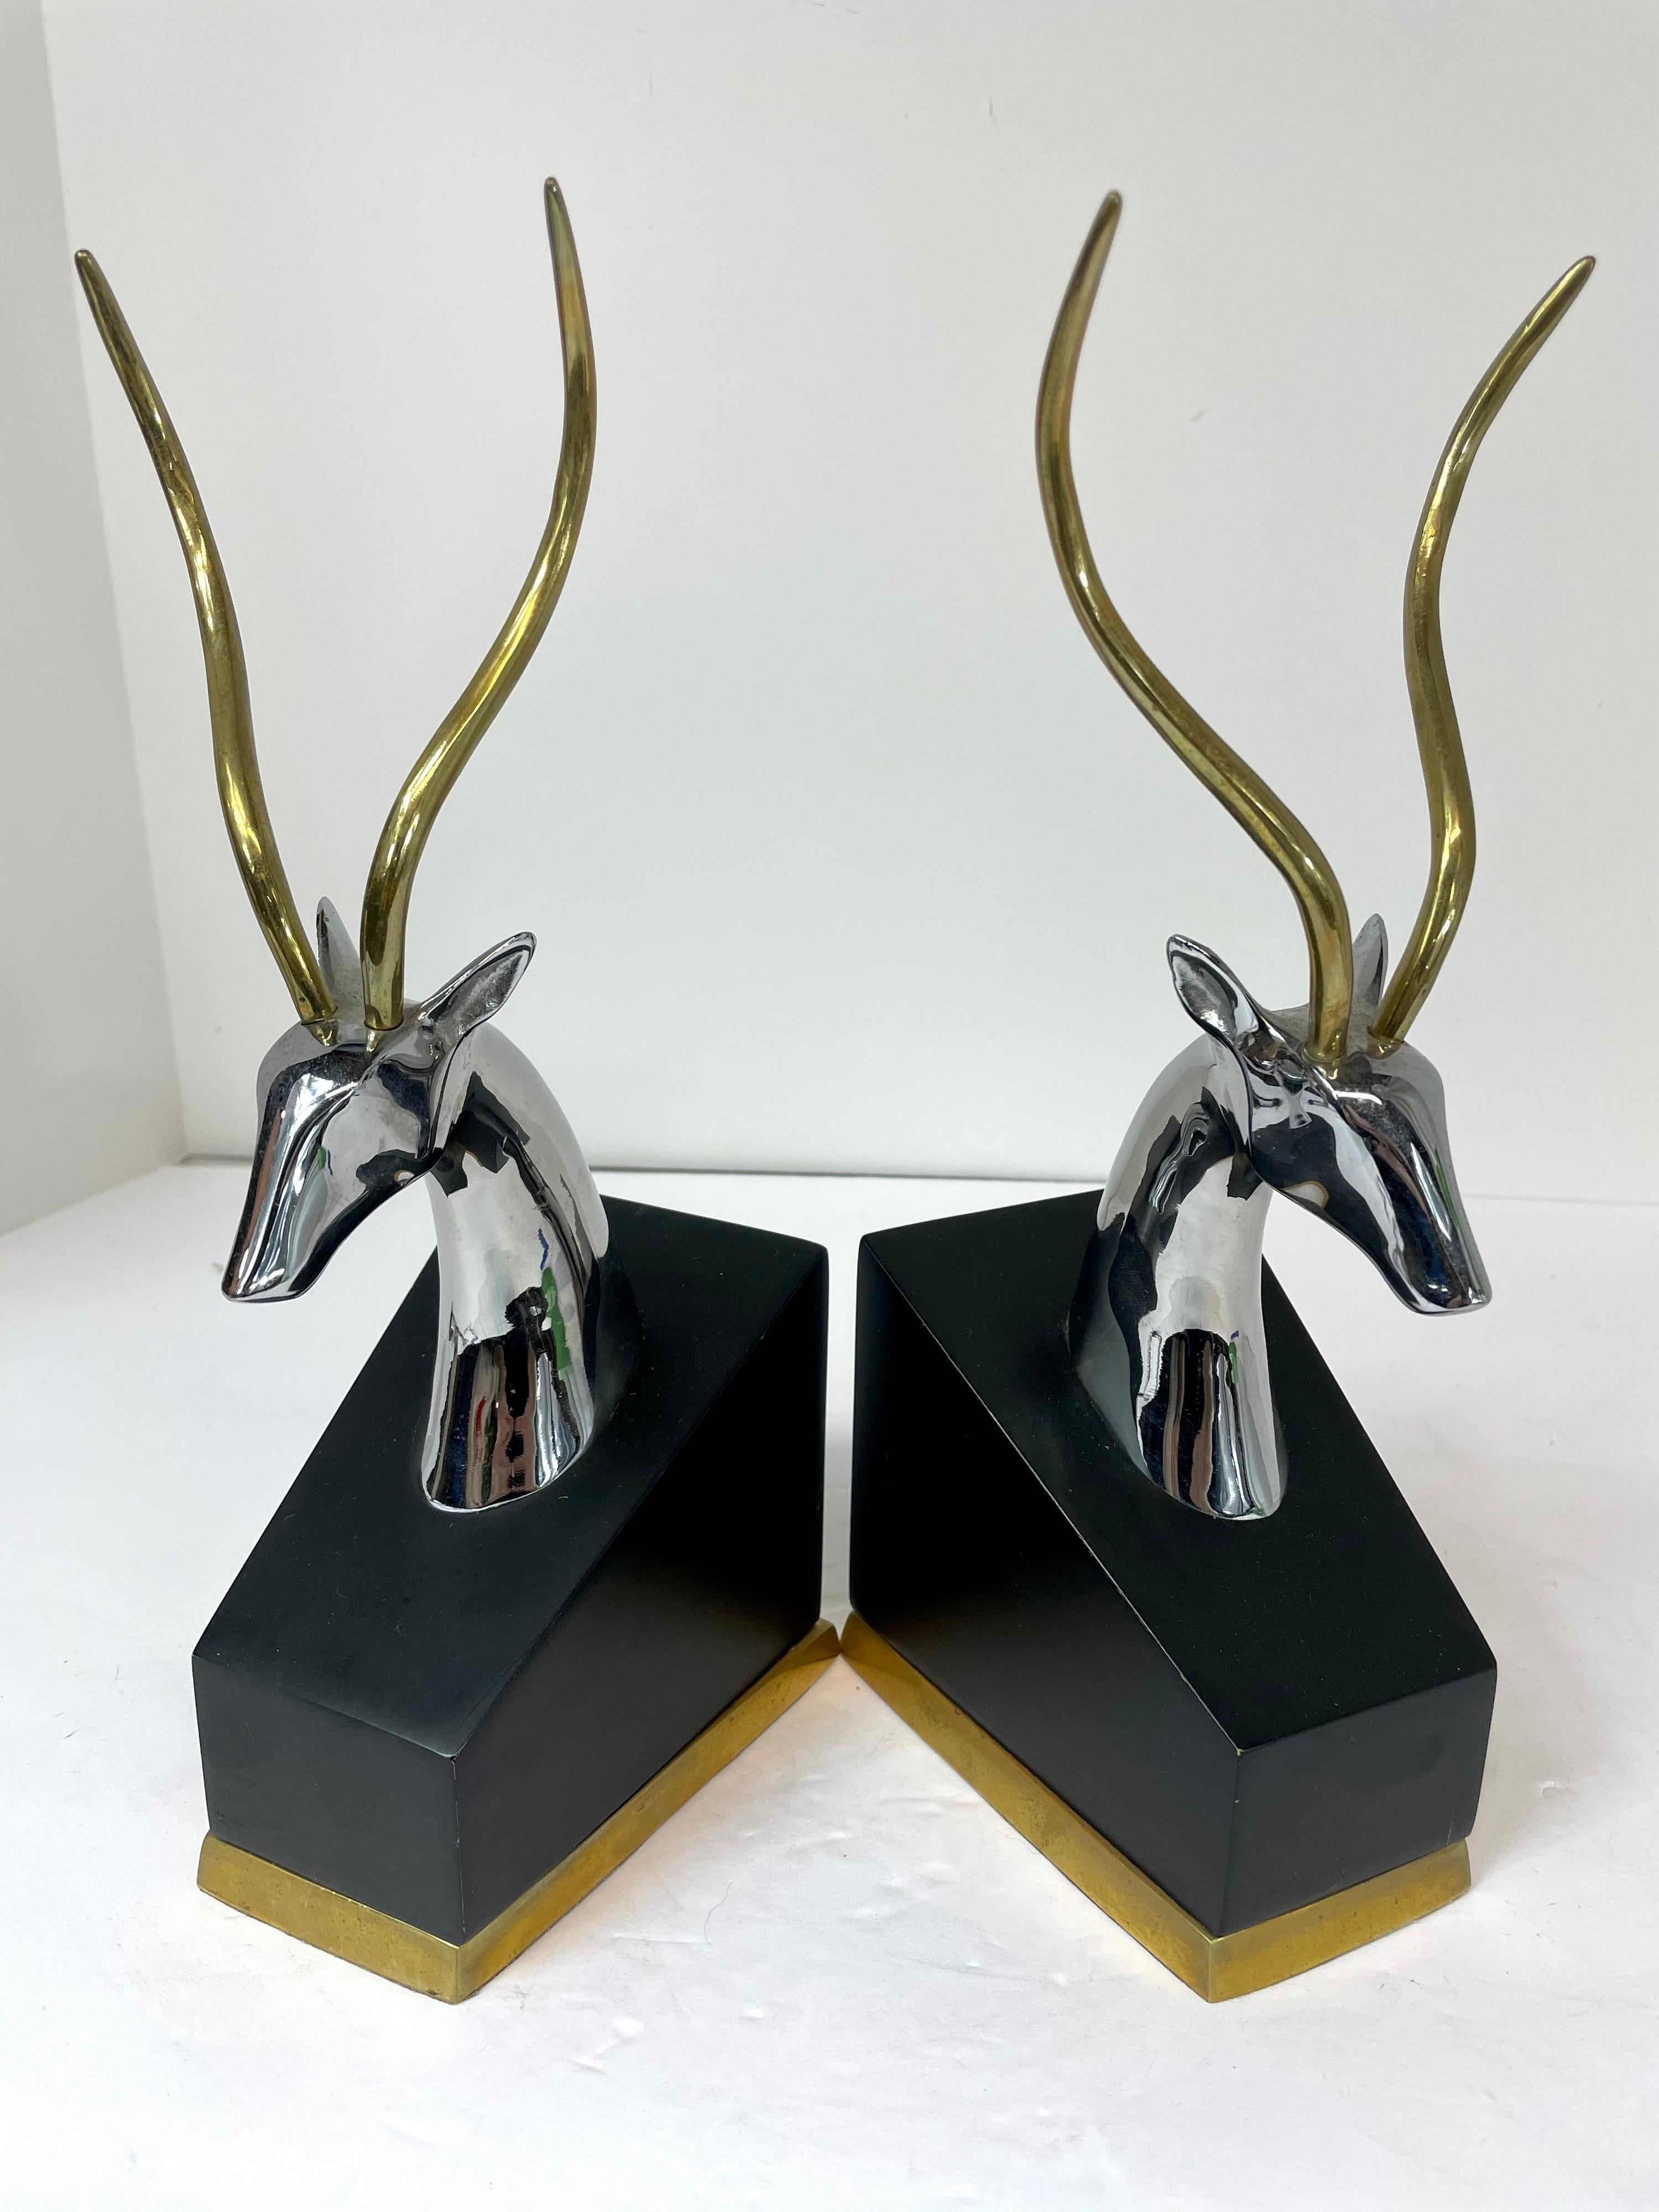 Art Deco Pair of Italian Impala Bookends in Brass and Chrome